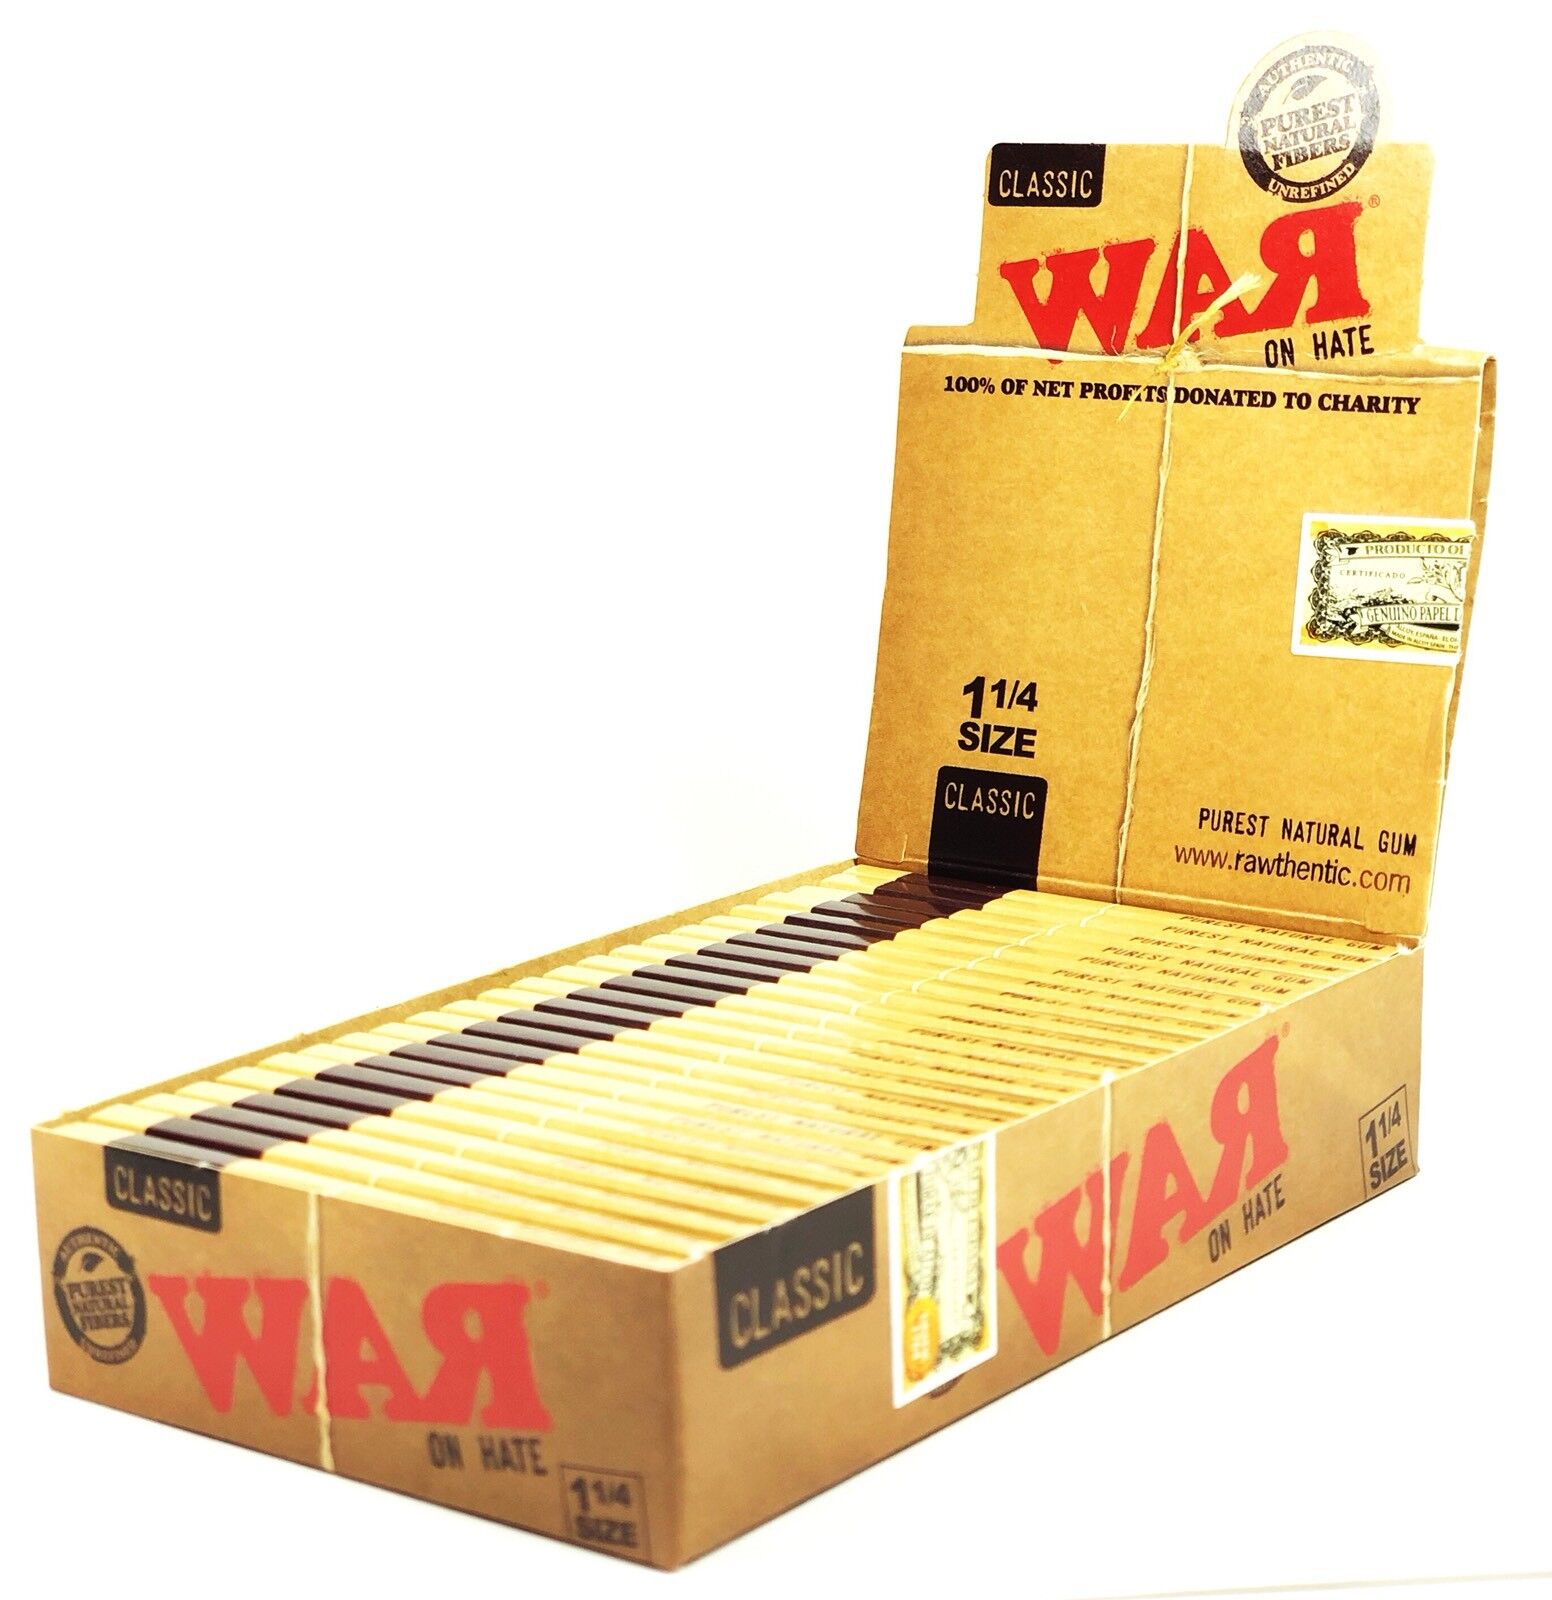 War on Hate by Raw 1 1/4 Cigarette Rolling Papers Full Box Profits go to Charity